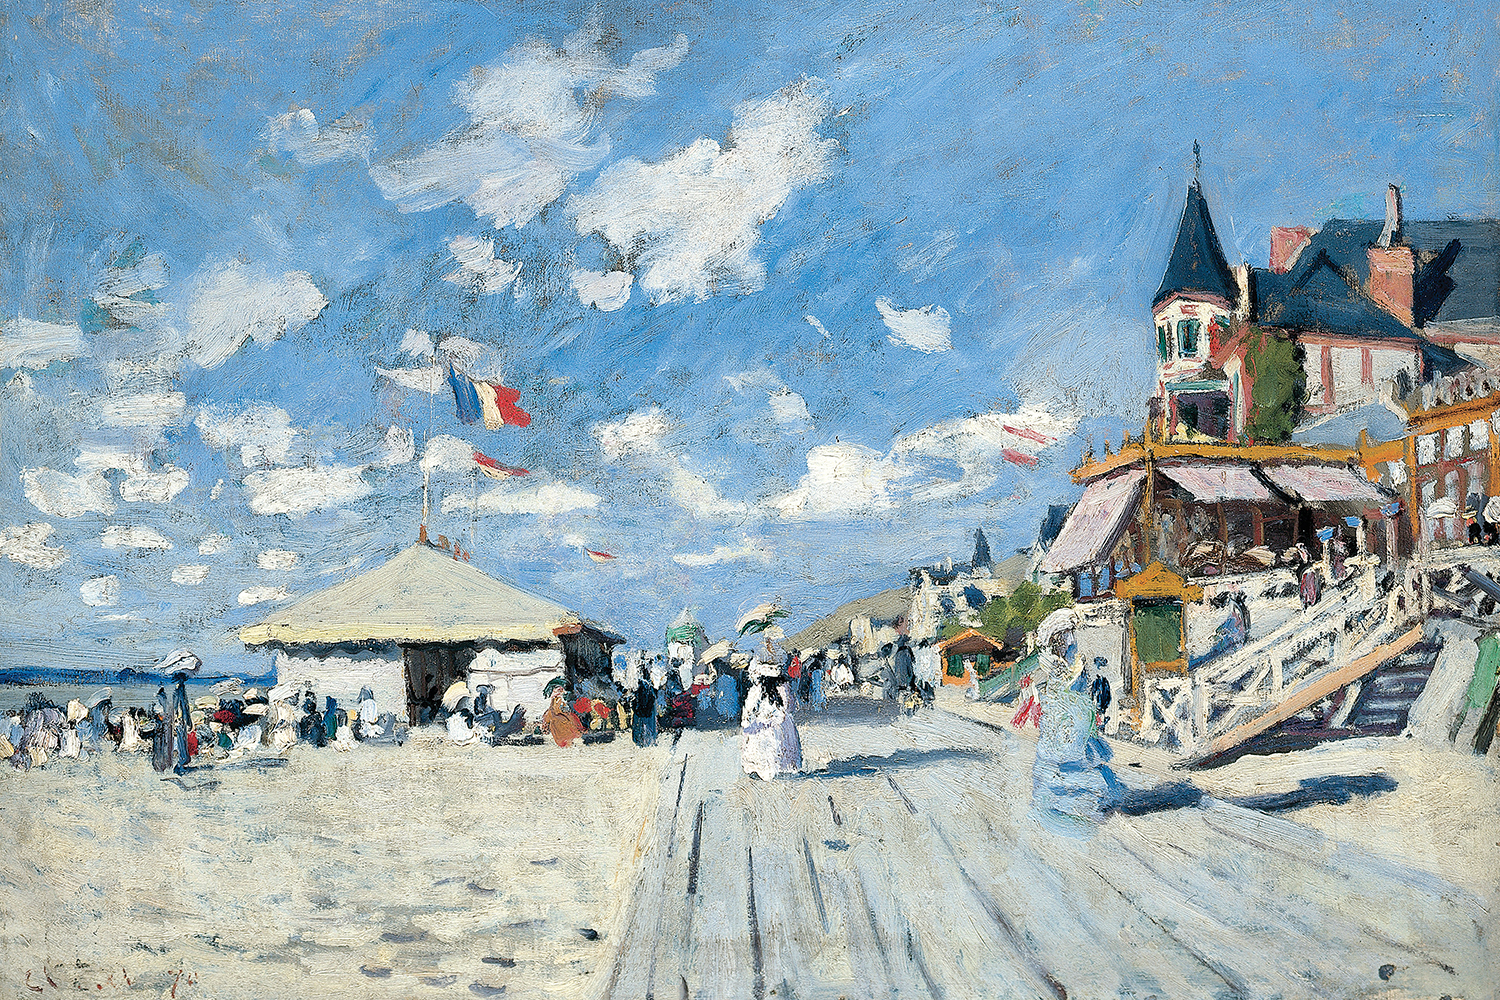 boardwalk along the beach showing tents, houses, and passerbys